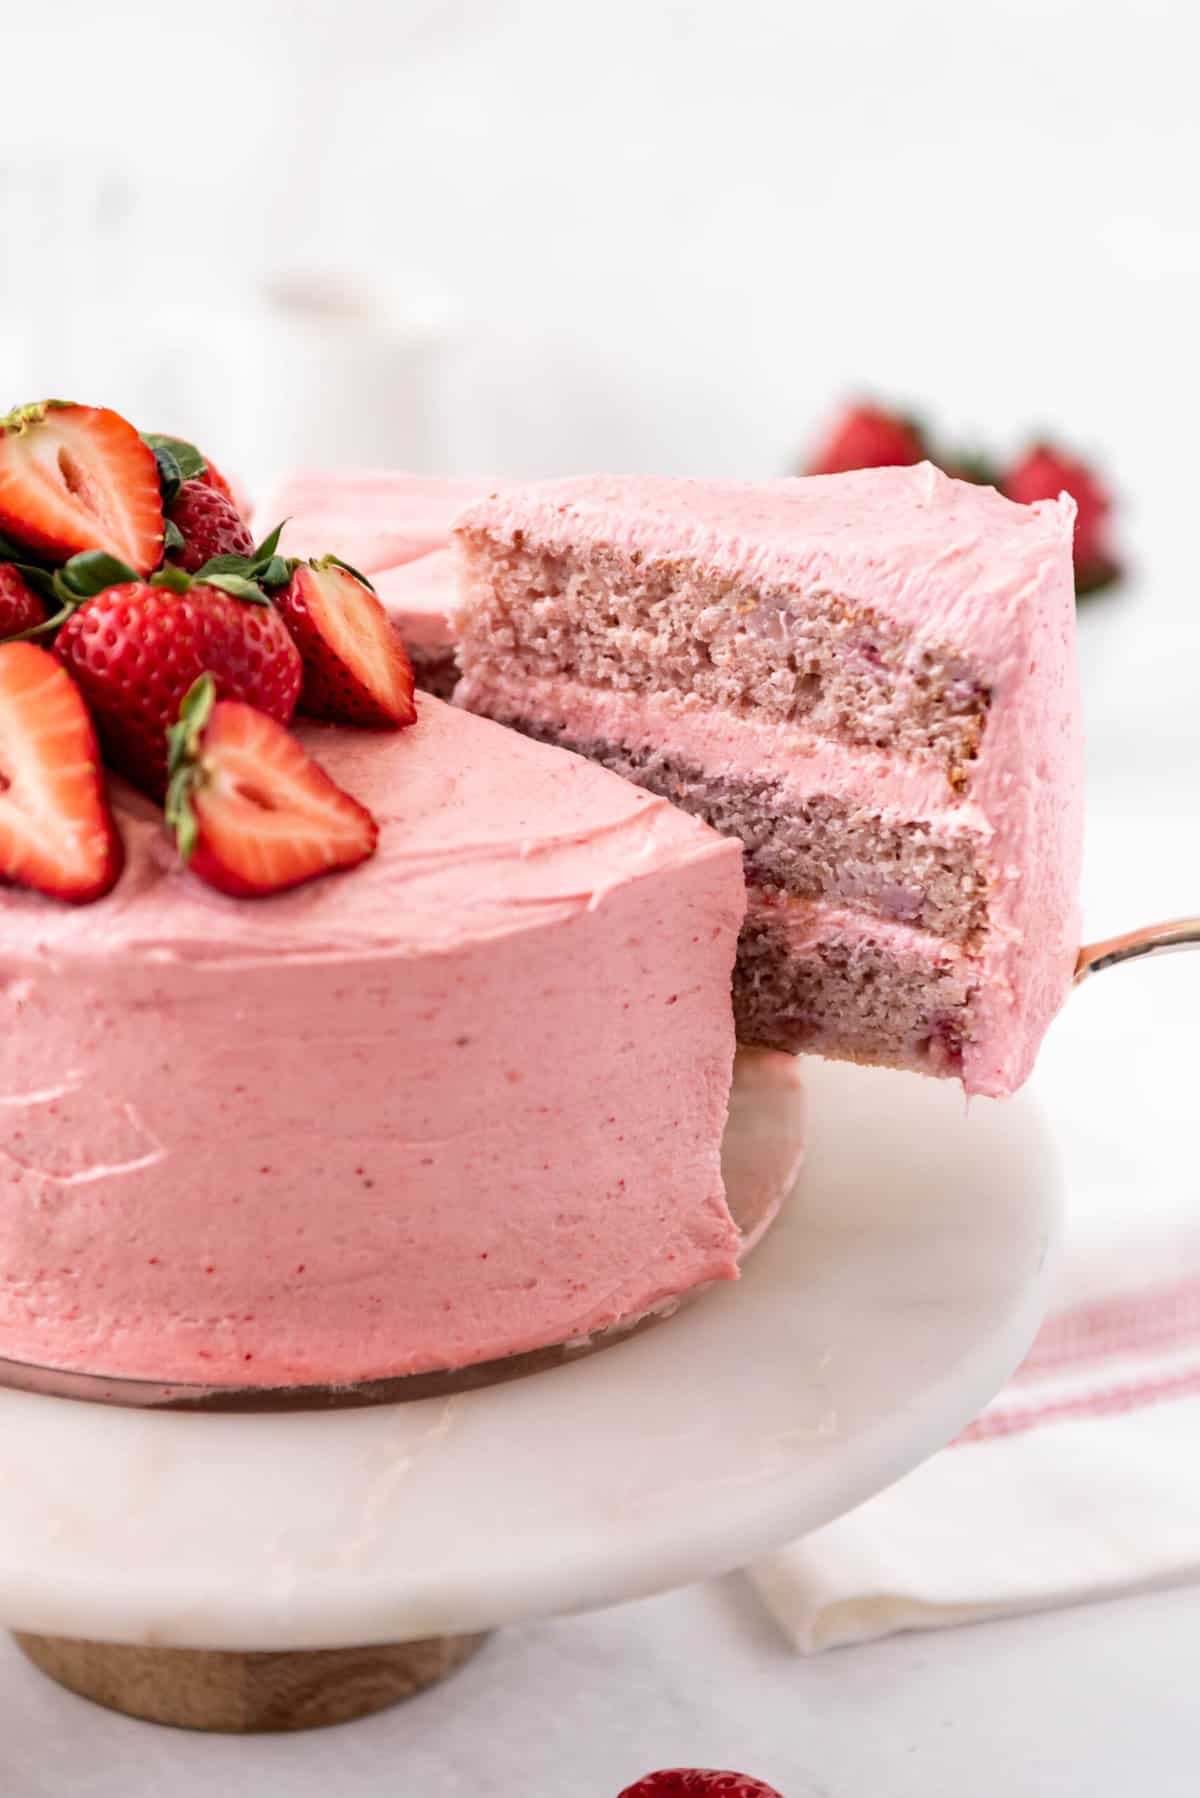 A slice of strawberry cake being lifted out of the full cake.